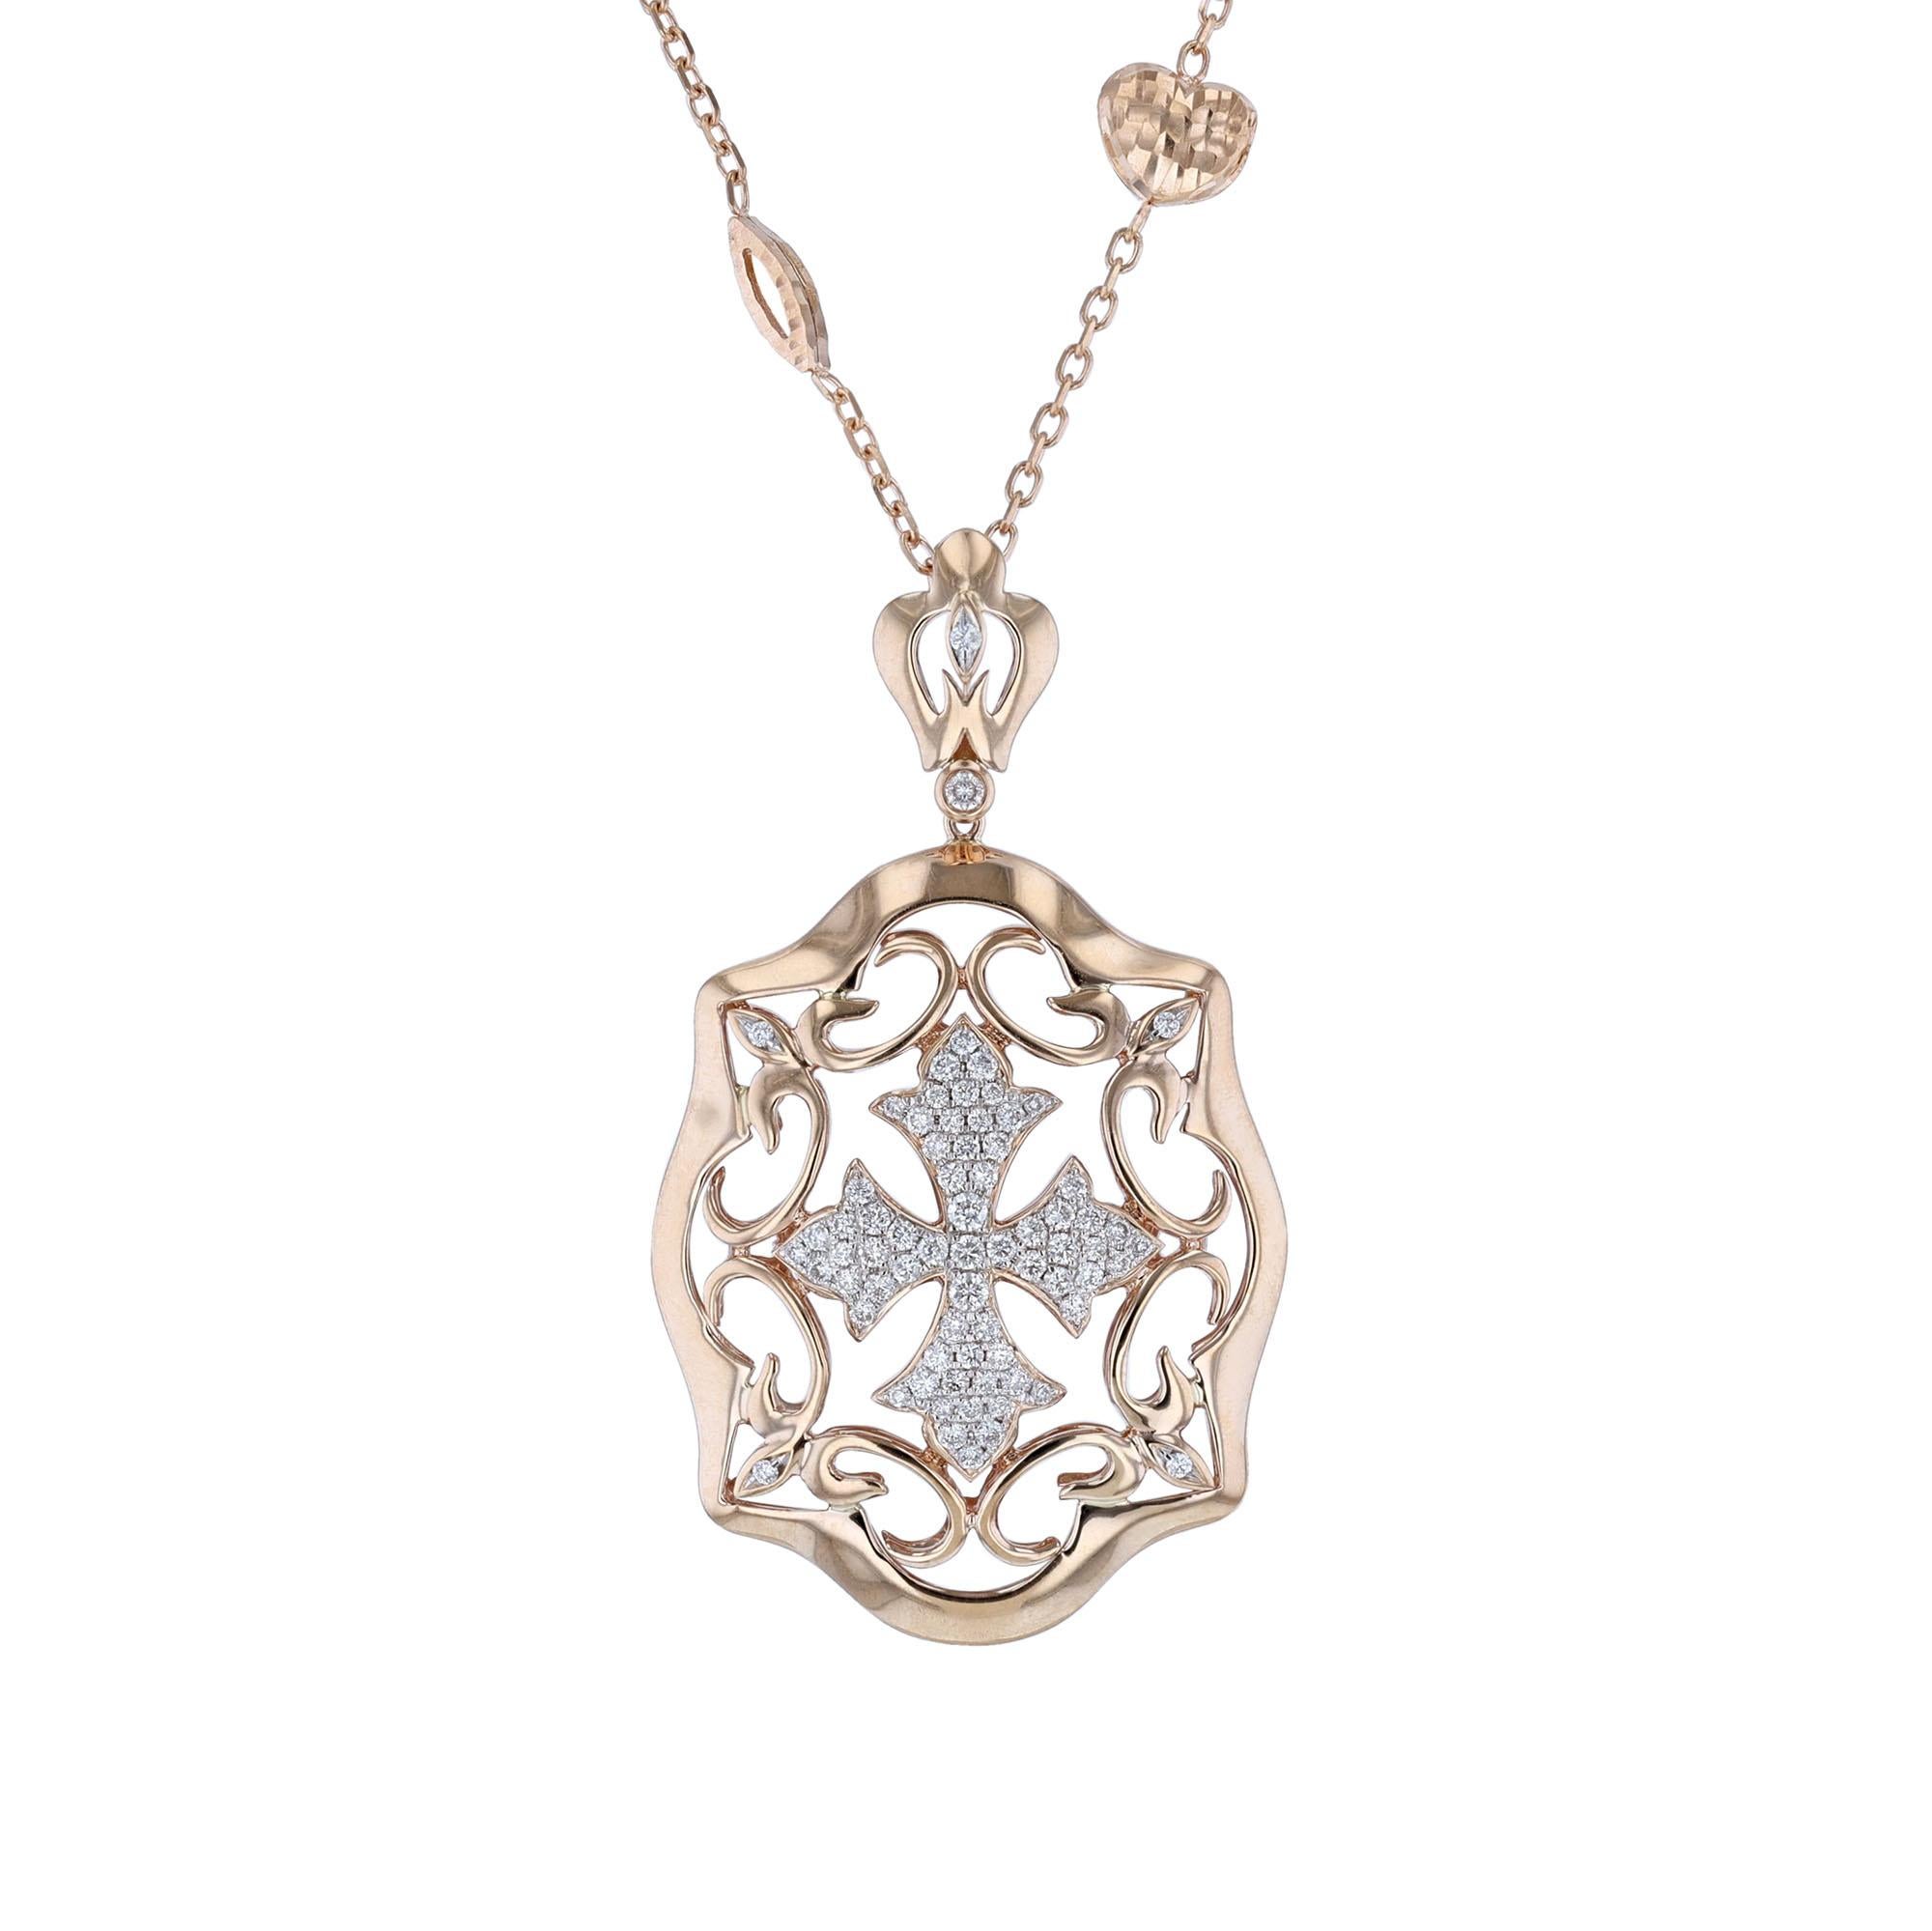 This necklace is made in 18K rose gold and features a pendant with a cross of 71 round cut diamonds. All diamonds are pave' set and weigh 2.05 carats. Attached to a station necklace of heart and oval spacers. Necklace has a color grade (H) and